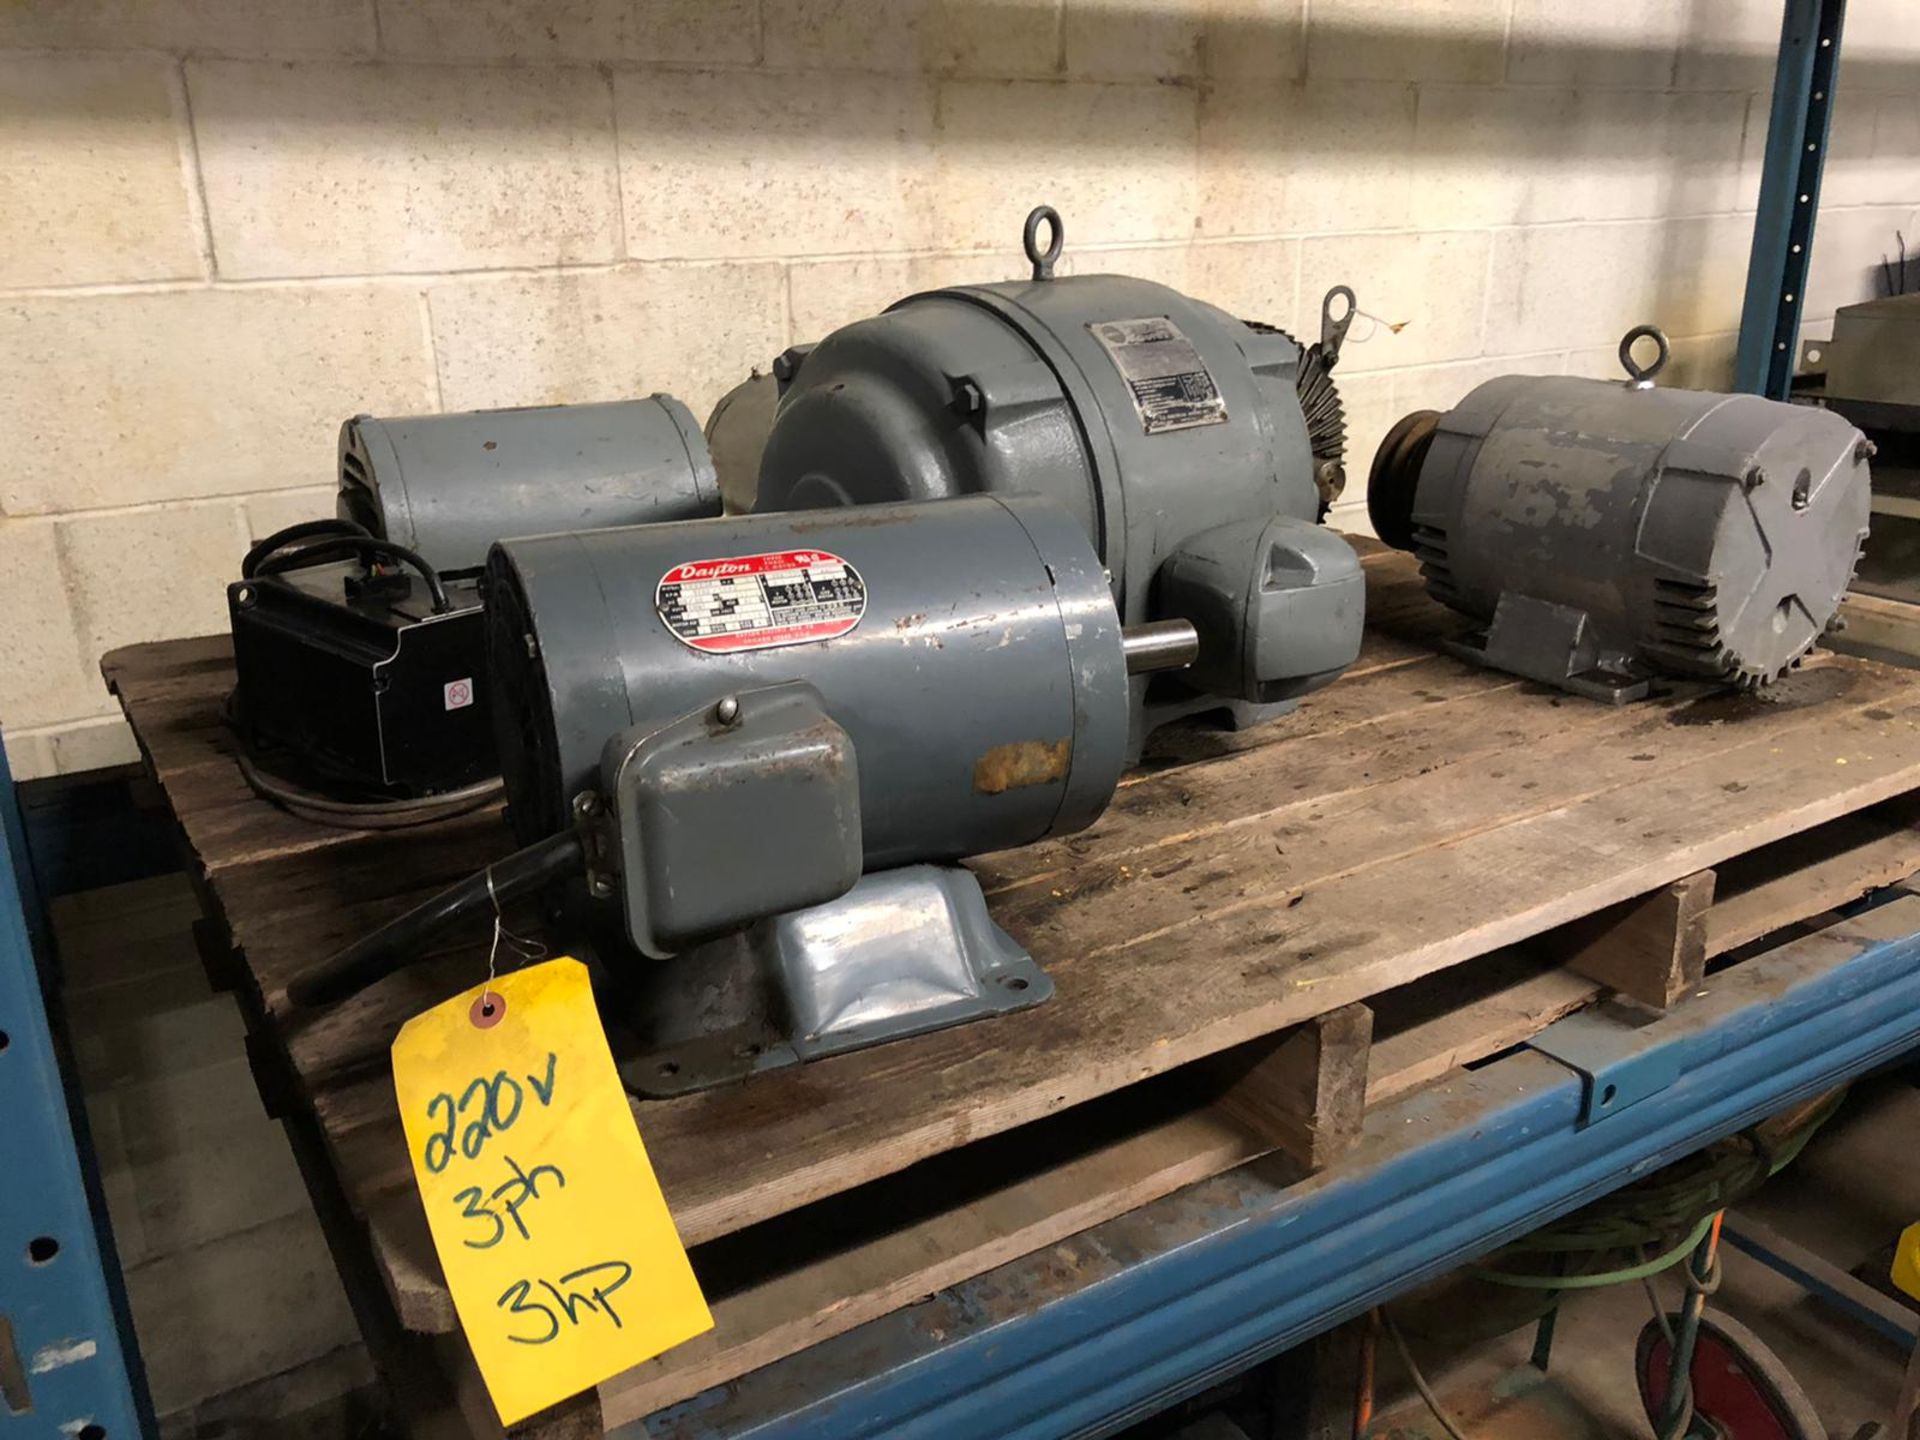 Lot of 7 (7 units) Industrial Motors with Drive Units - Dayton, Baldor and more